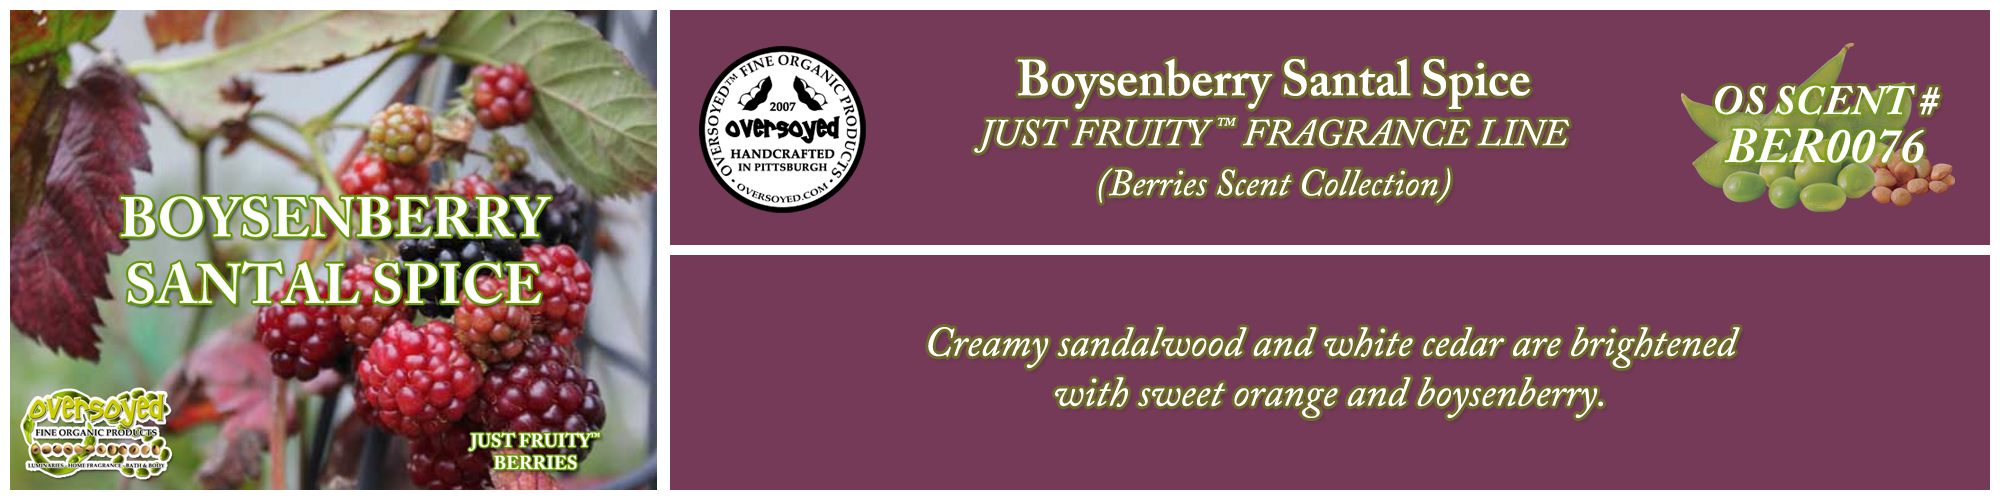 Boysenberry Santal Spice Handcrafted Products Collection